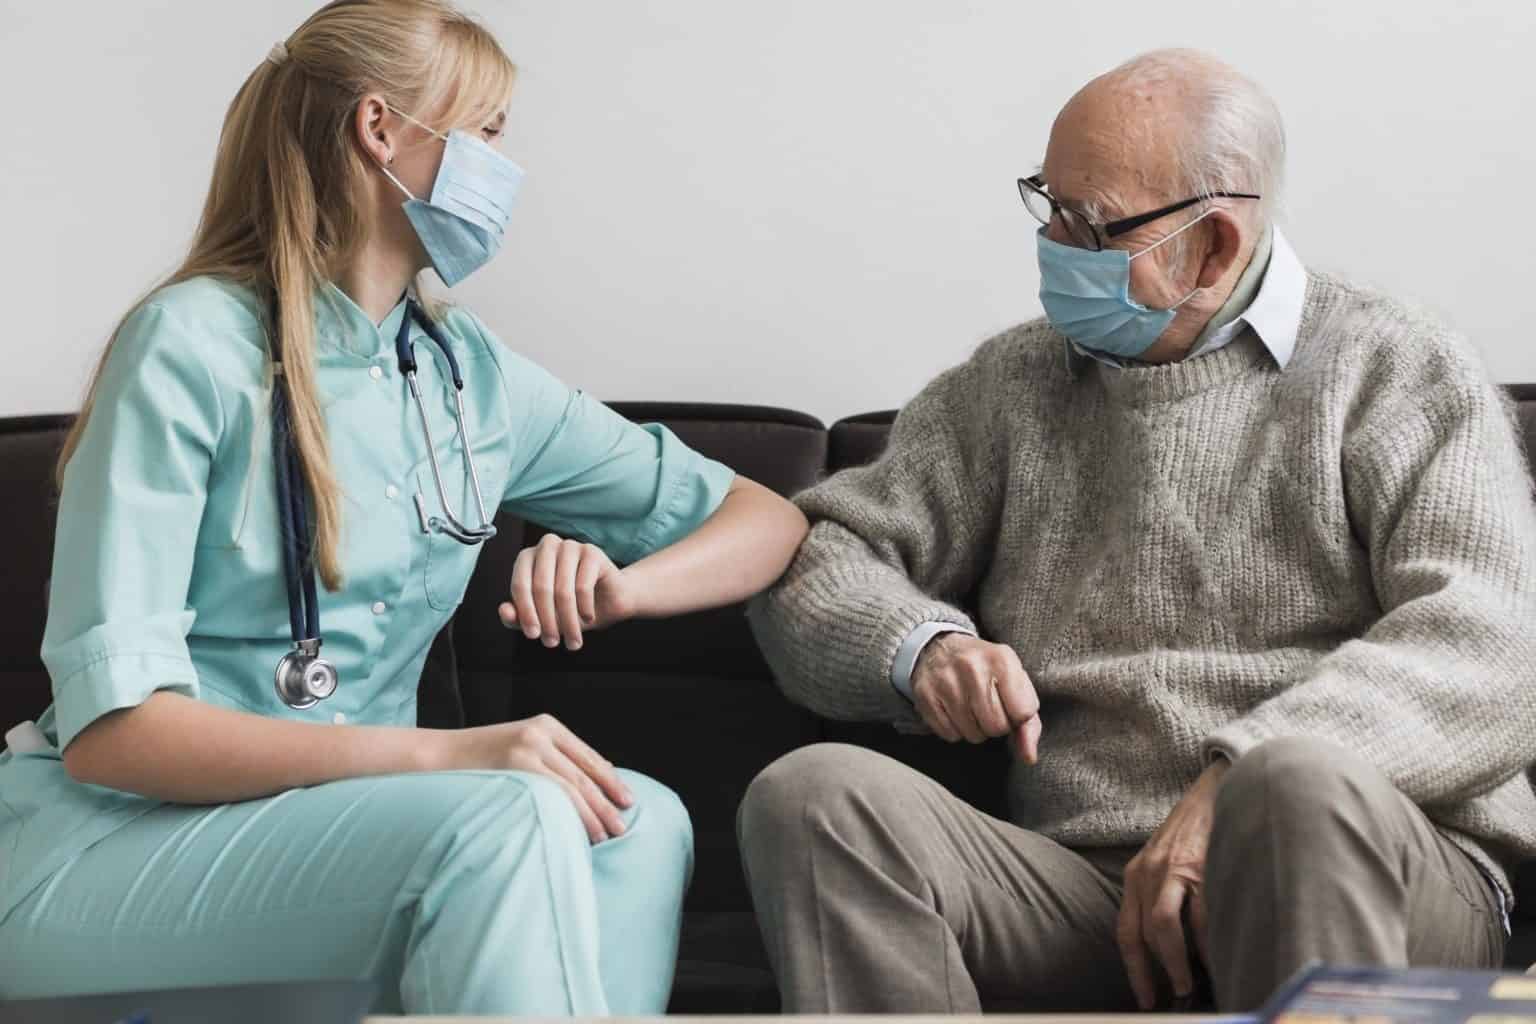 photograph of a nurse and an older man touching elbows